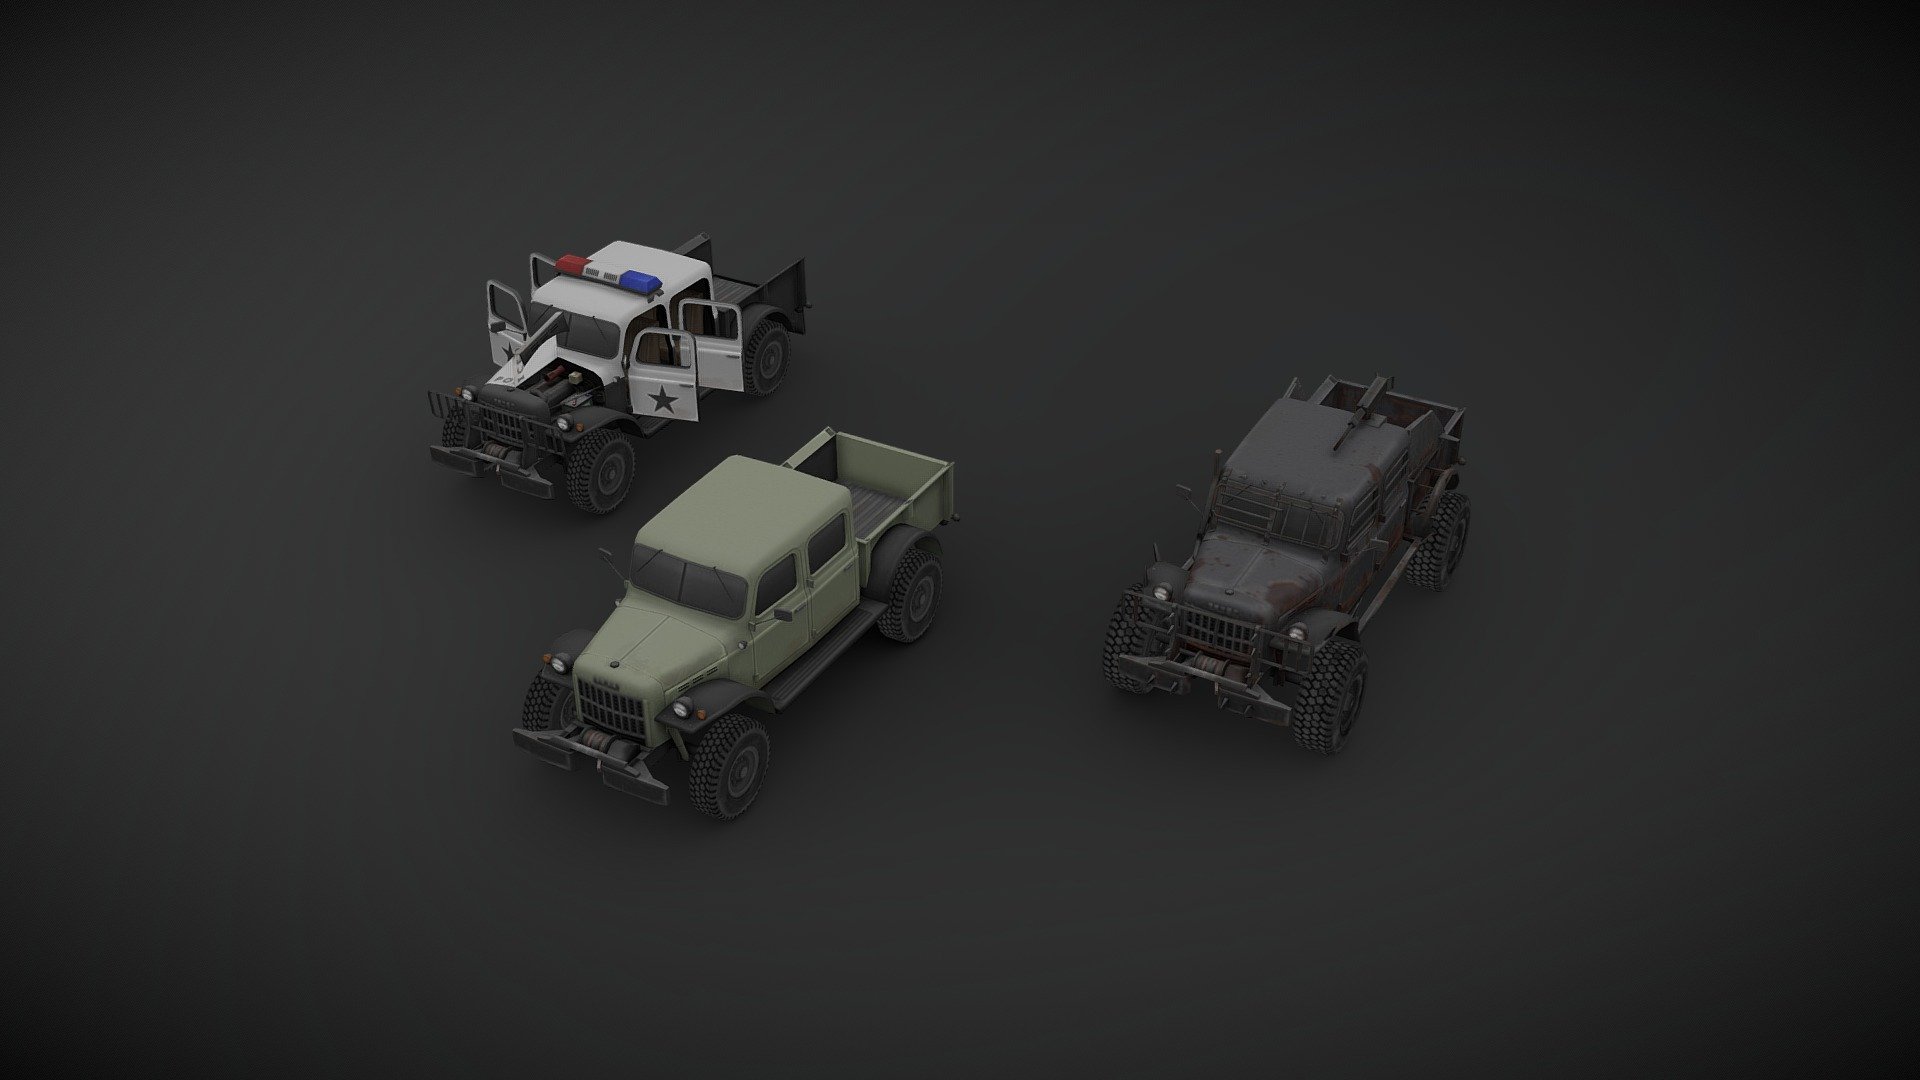 Showcase of a 1949 Dodge Power Wagon I’ve made for project ZOMBOID, low poly but with a high detail texture, optimized for game engine. This version is not a 100% true to the original since there are some compromises I’ve had to make to present it here.

You can find the actual version in project ZOMBOID STEAM Workshop 3d model